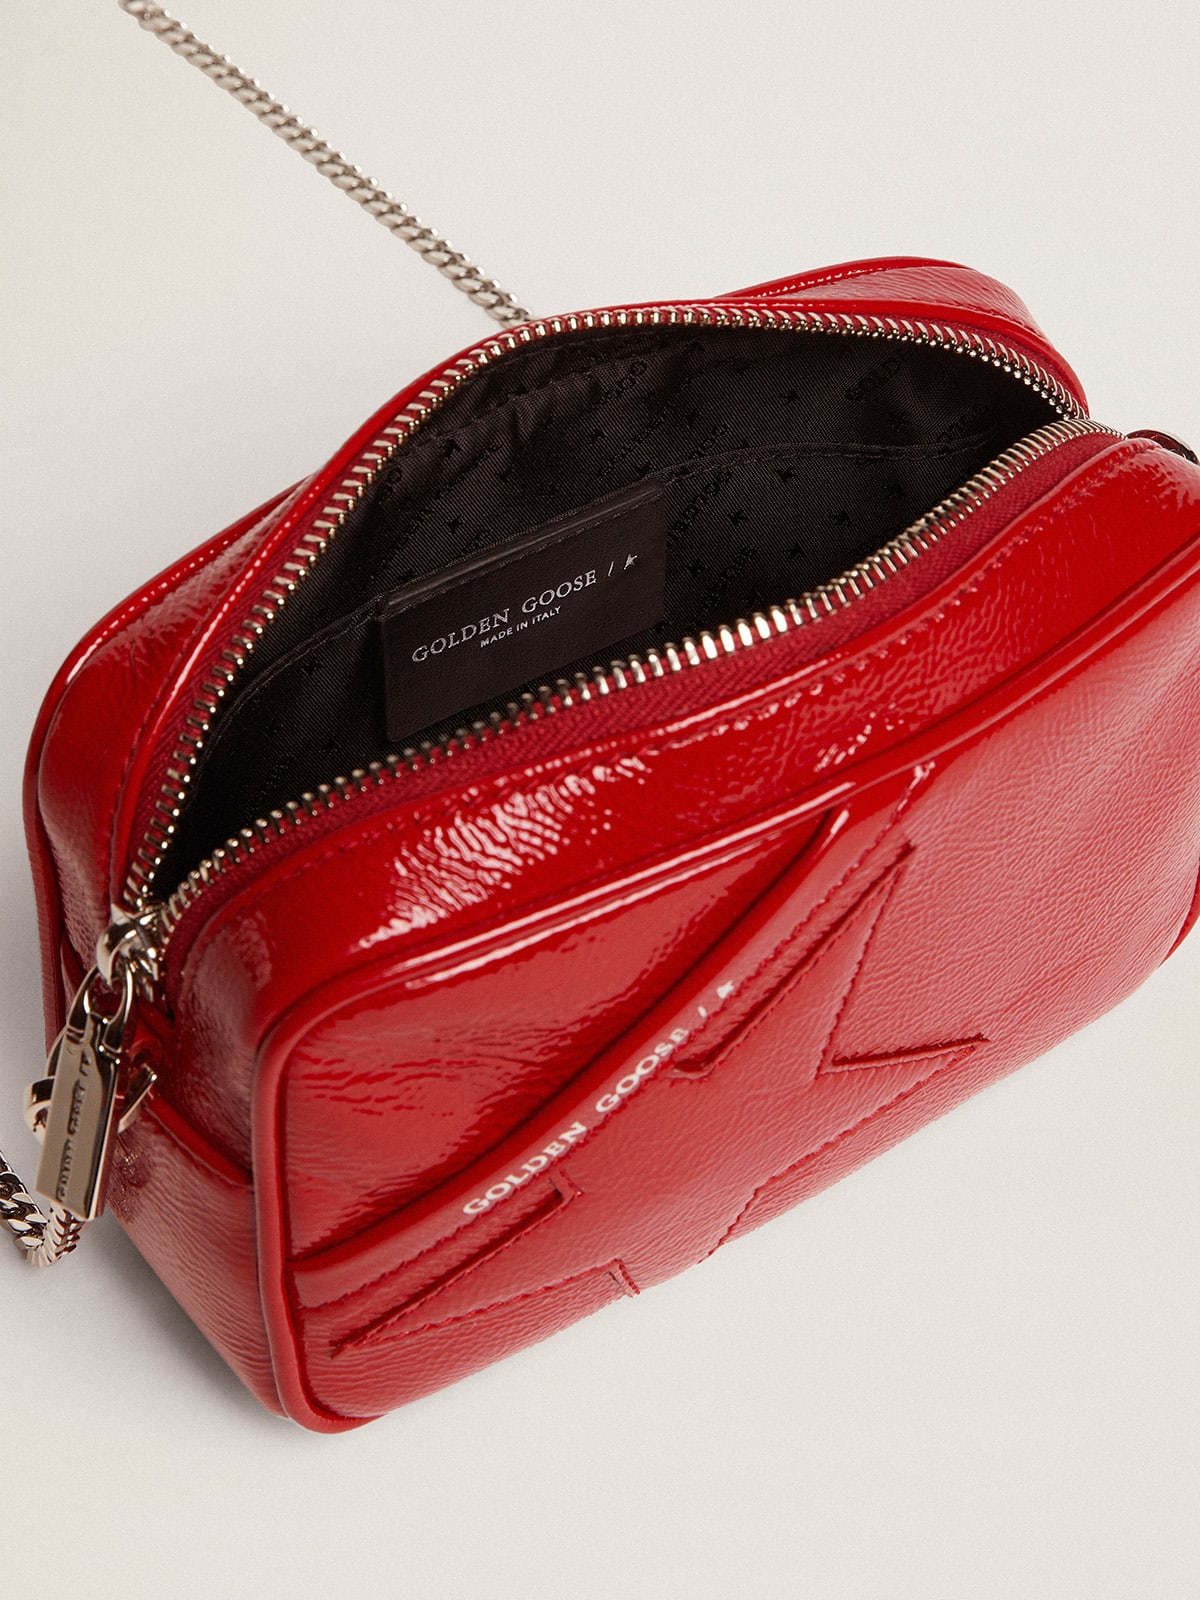 Golden Goose - Mini Star Bag in red patent leather with tone-on-tone star in 